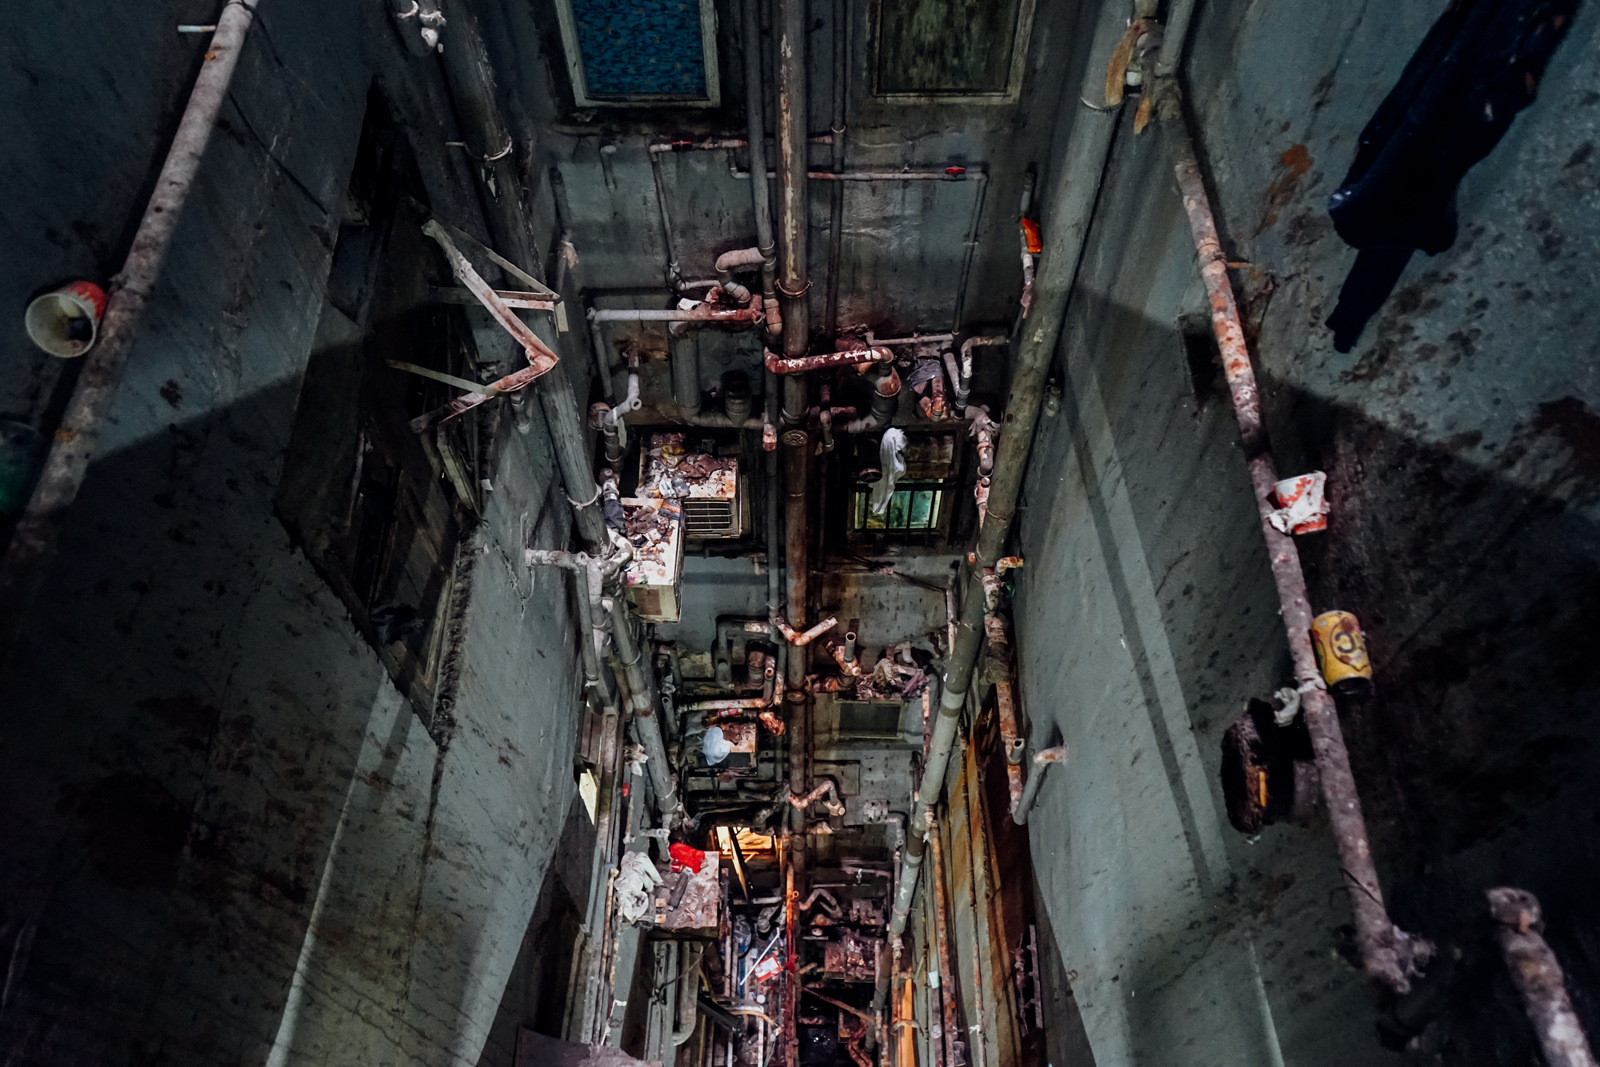 A glimpse of laundry, garbage and rusted pipes while looking down at a grimy interior courtyard of one of the towers of the Chungking Mansions in Hong Kong. (Zachary Senn)